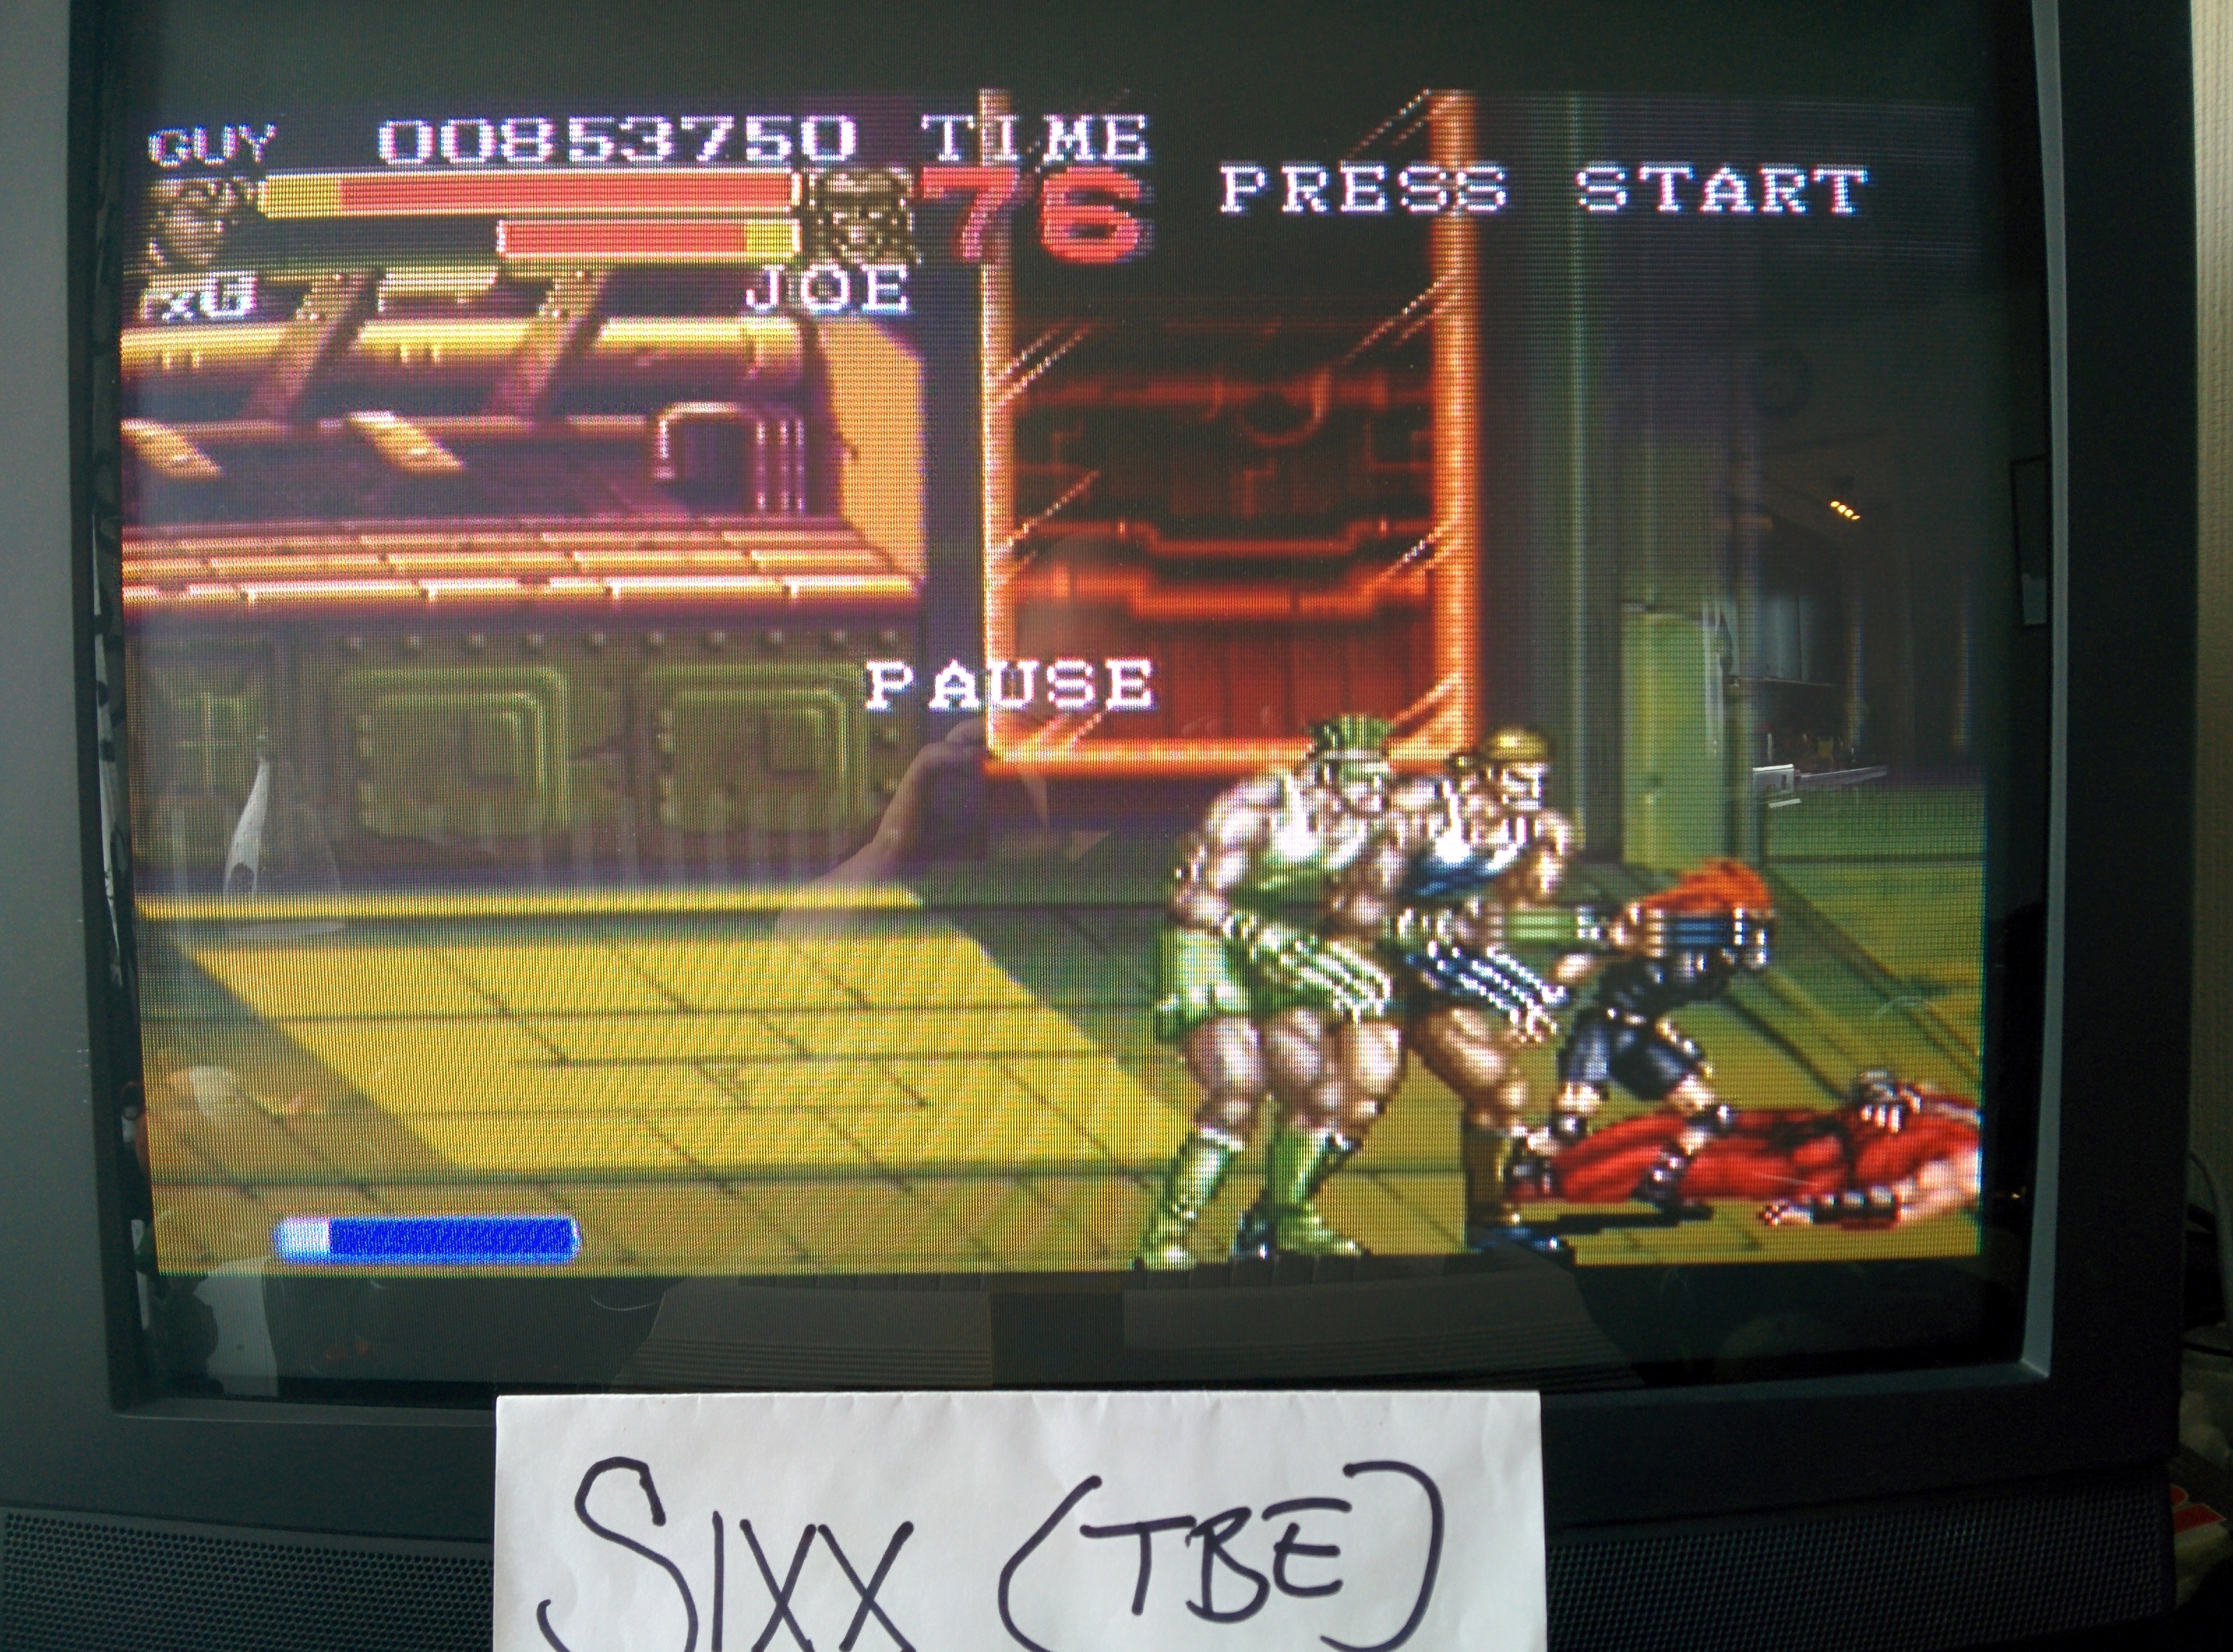 Sixx: Final Fight 3 (SNES/Super Famicom Emulated) 853,750 points on 2014-05-06 10:20:17